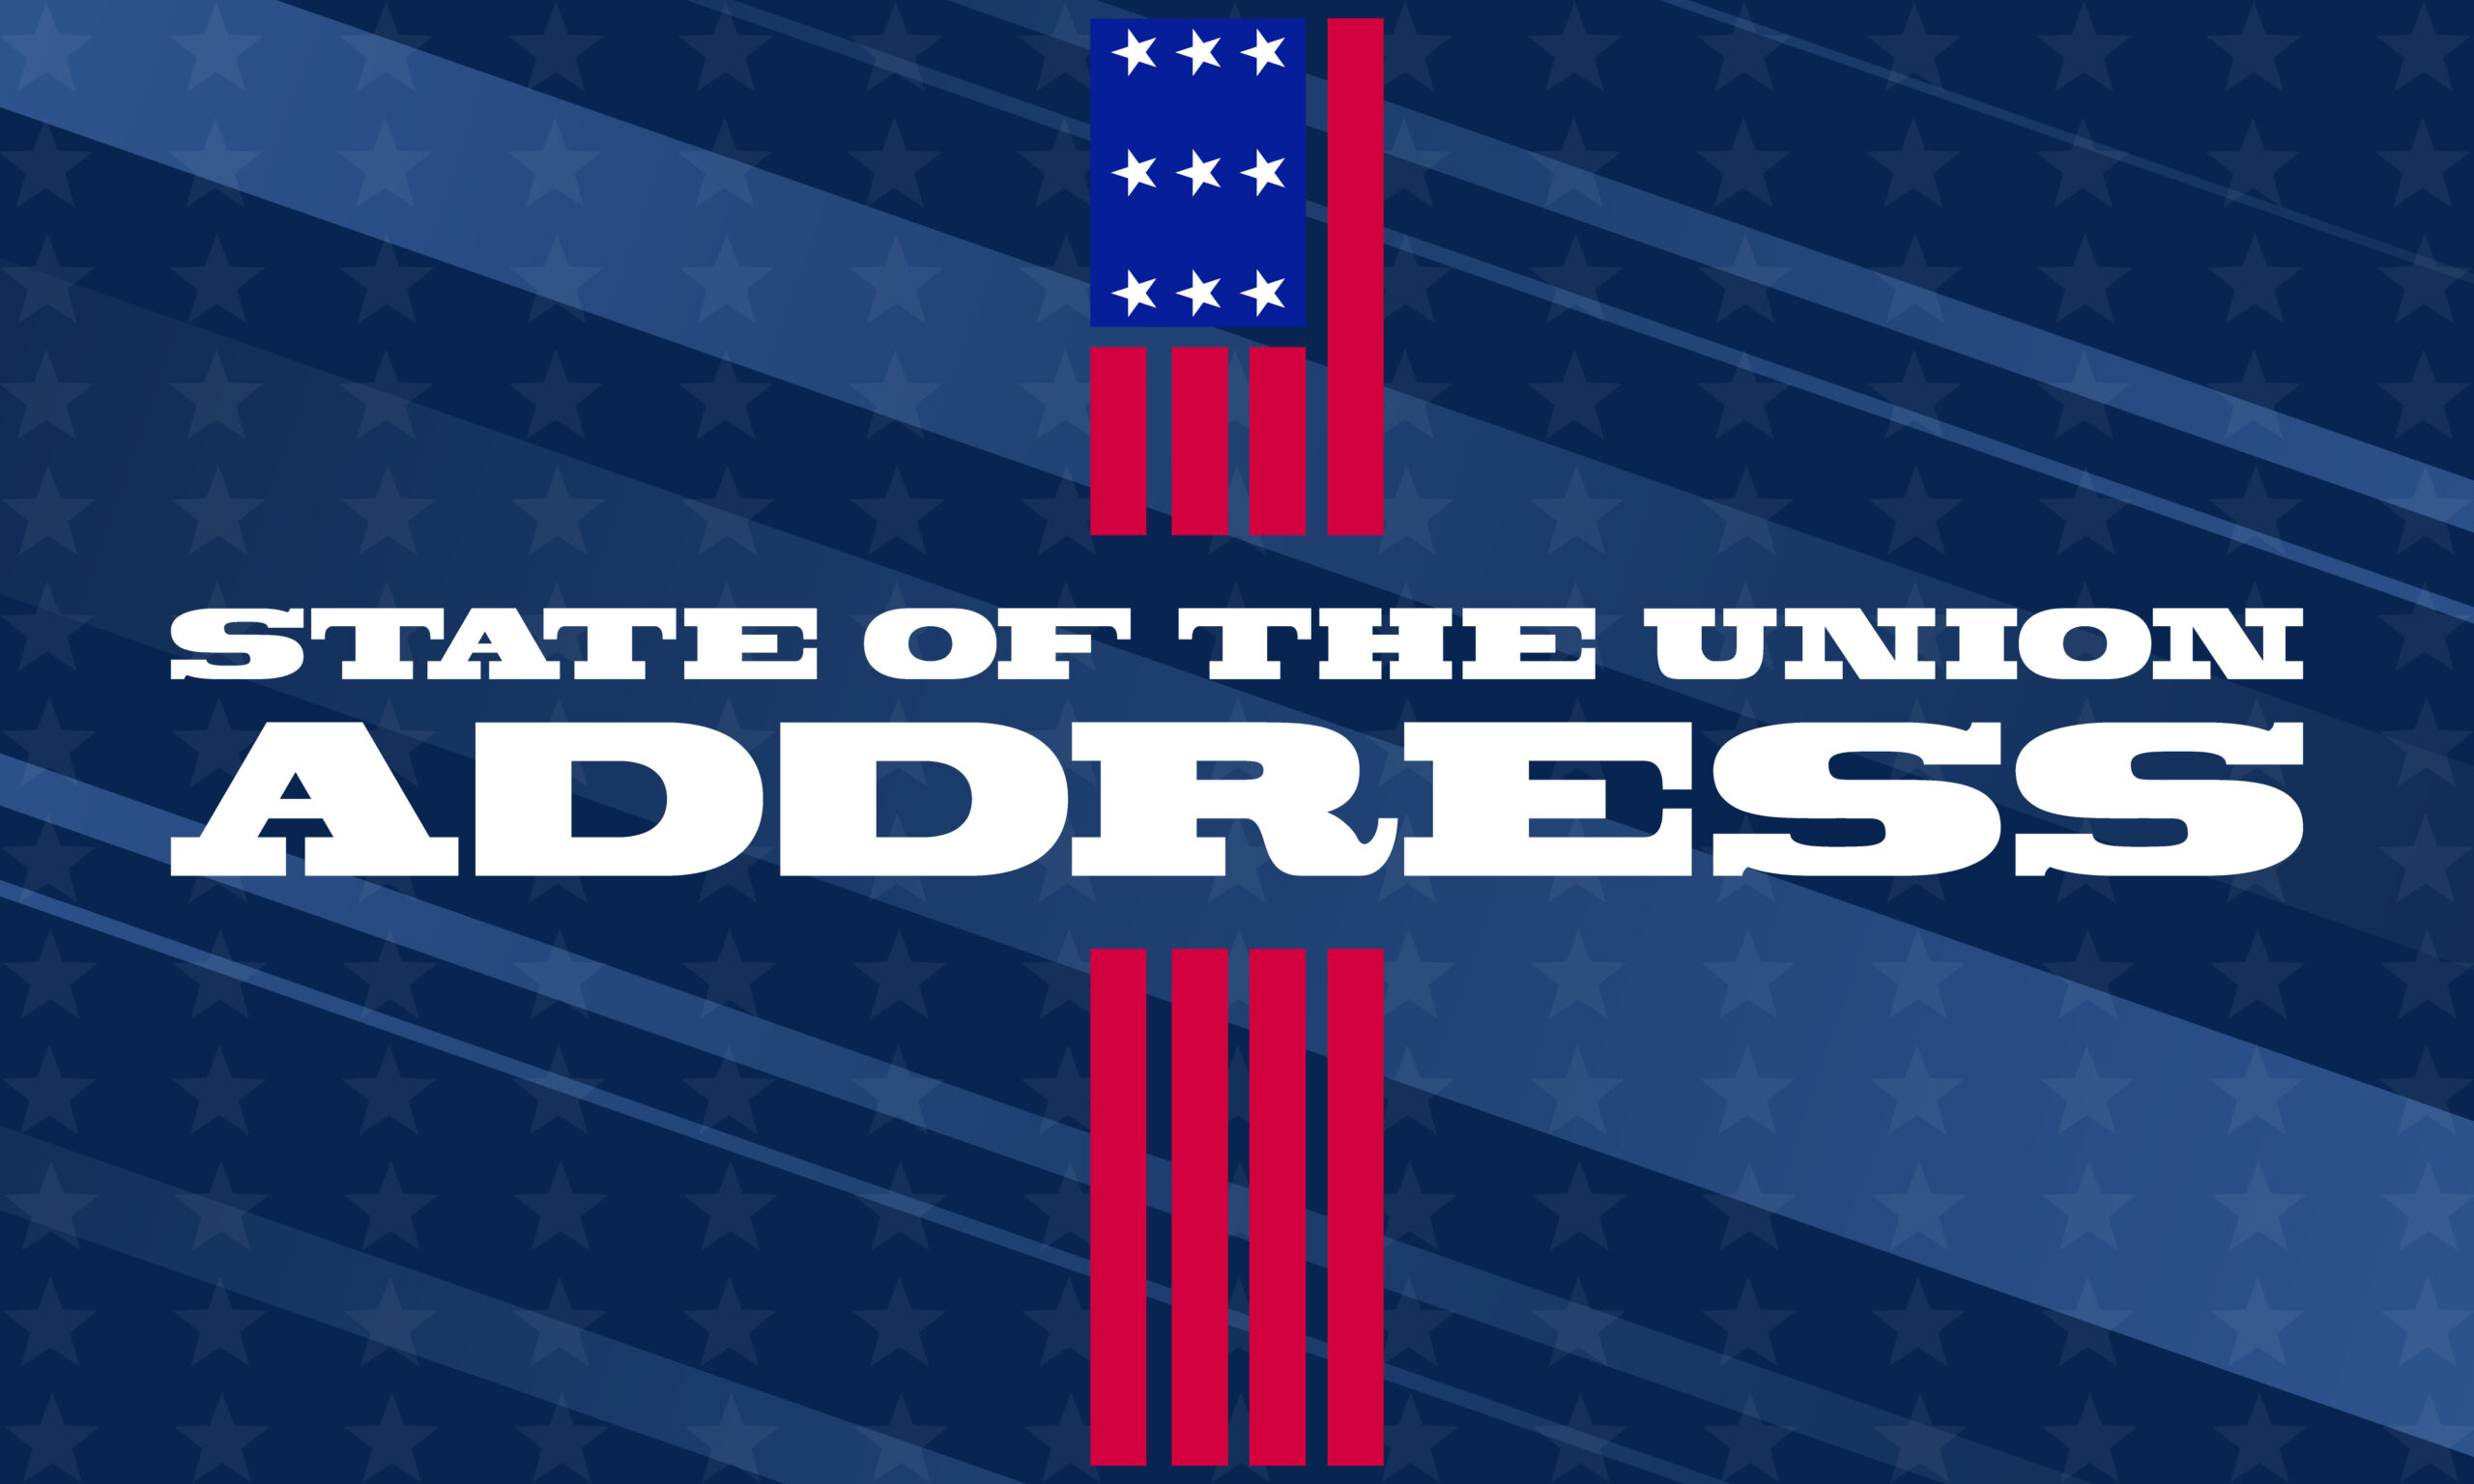 "State of the Union Address" written across blue background with symbolic U.S. flag running down the middle vertically